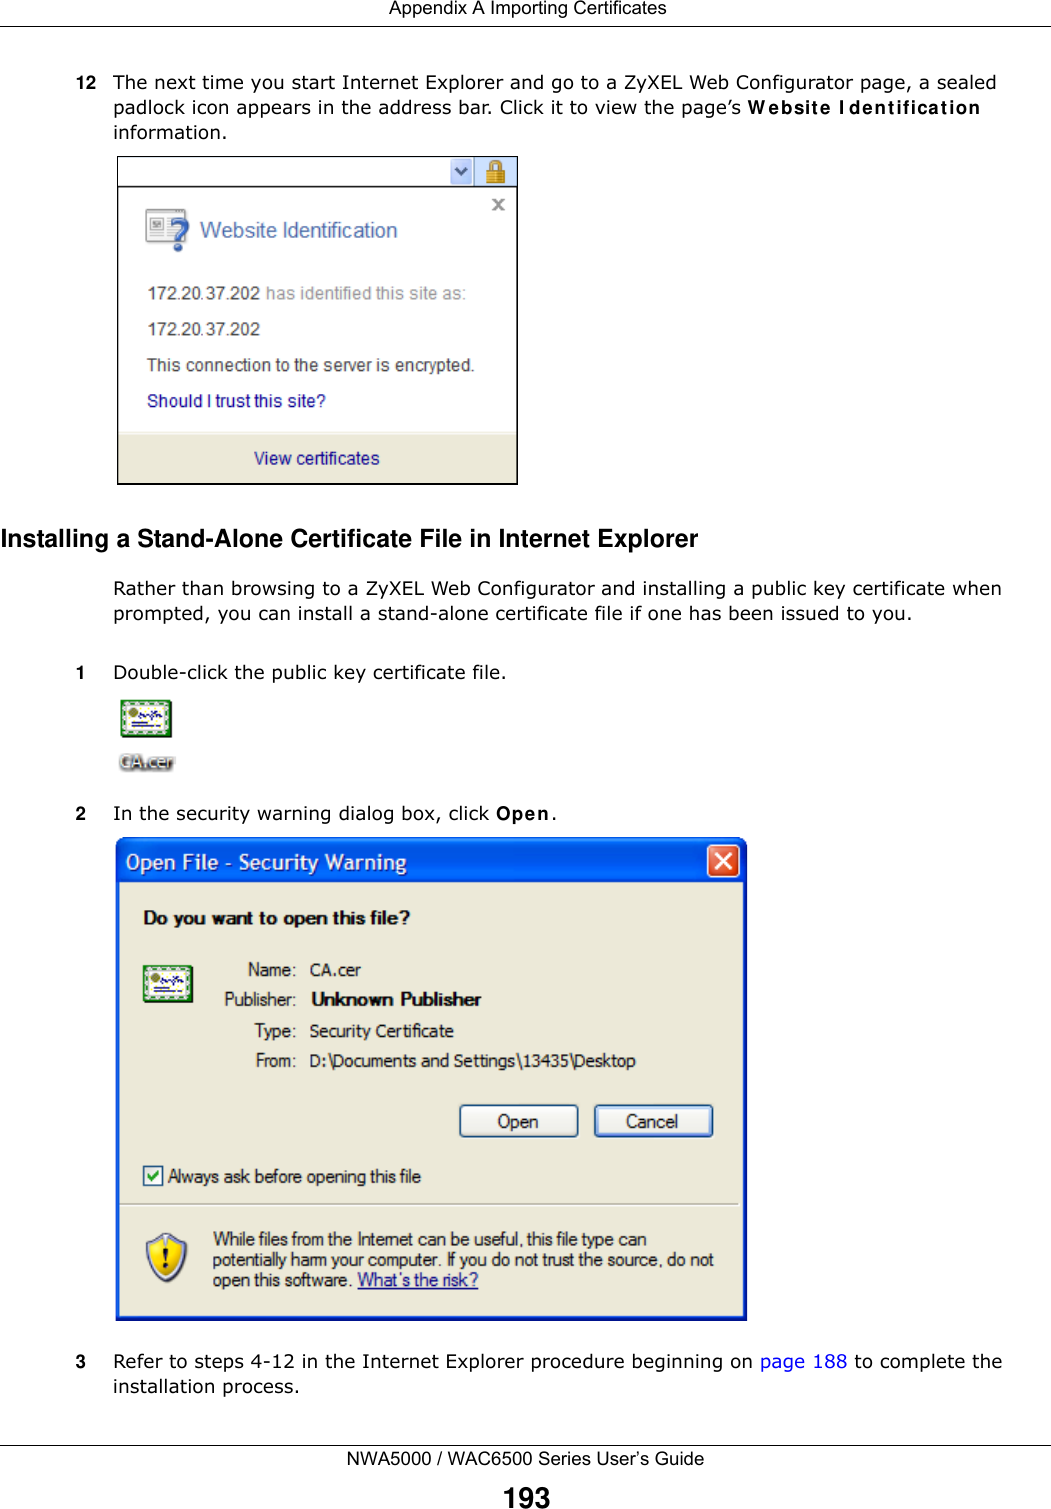  Appendix A Importing CertificatesNWA5000 / WAC6500 Series User’s Guide19312 The next time you start Internet Explorer and go to a ZyXEL Web Configurator page, a sealed padlock icon appears in the address bar. Click it to view the page’s W ebsite  I dent ificat ion  information.Installing a Stand-Alone Certificate File in Internet ExplorerRather than browsing to a ZyXEL Web Configurator and installing a public key certificate when prompted, you can install a stand-alone certificate file if one has been issued to you.1Double-click the public key certificate file.2In the security warning dialog box, click Open.3Refer to steps 4-12 in the Internet Explorer procedure beginning on page 188 to complete the installation process.